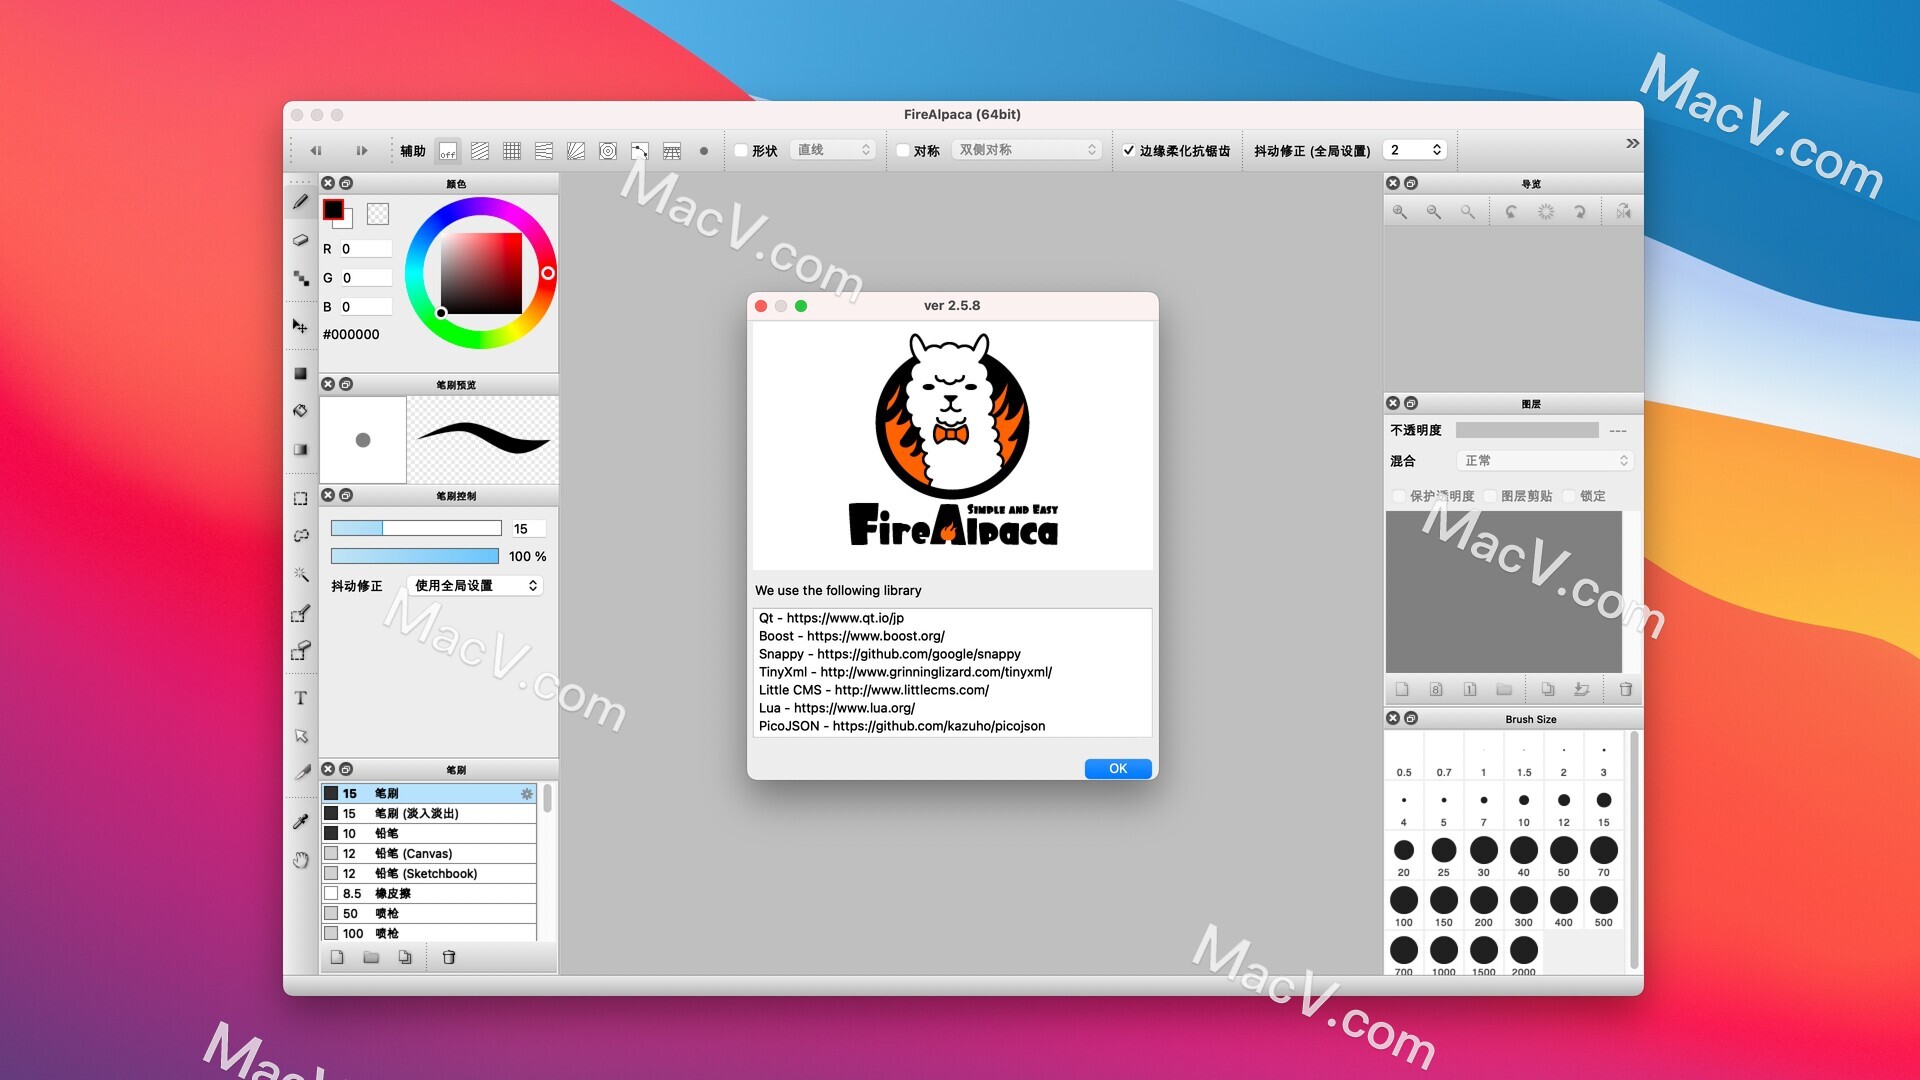 FireAlpaca for Mac (professional mac drawing software) v2.5.8 official